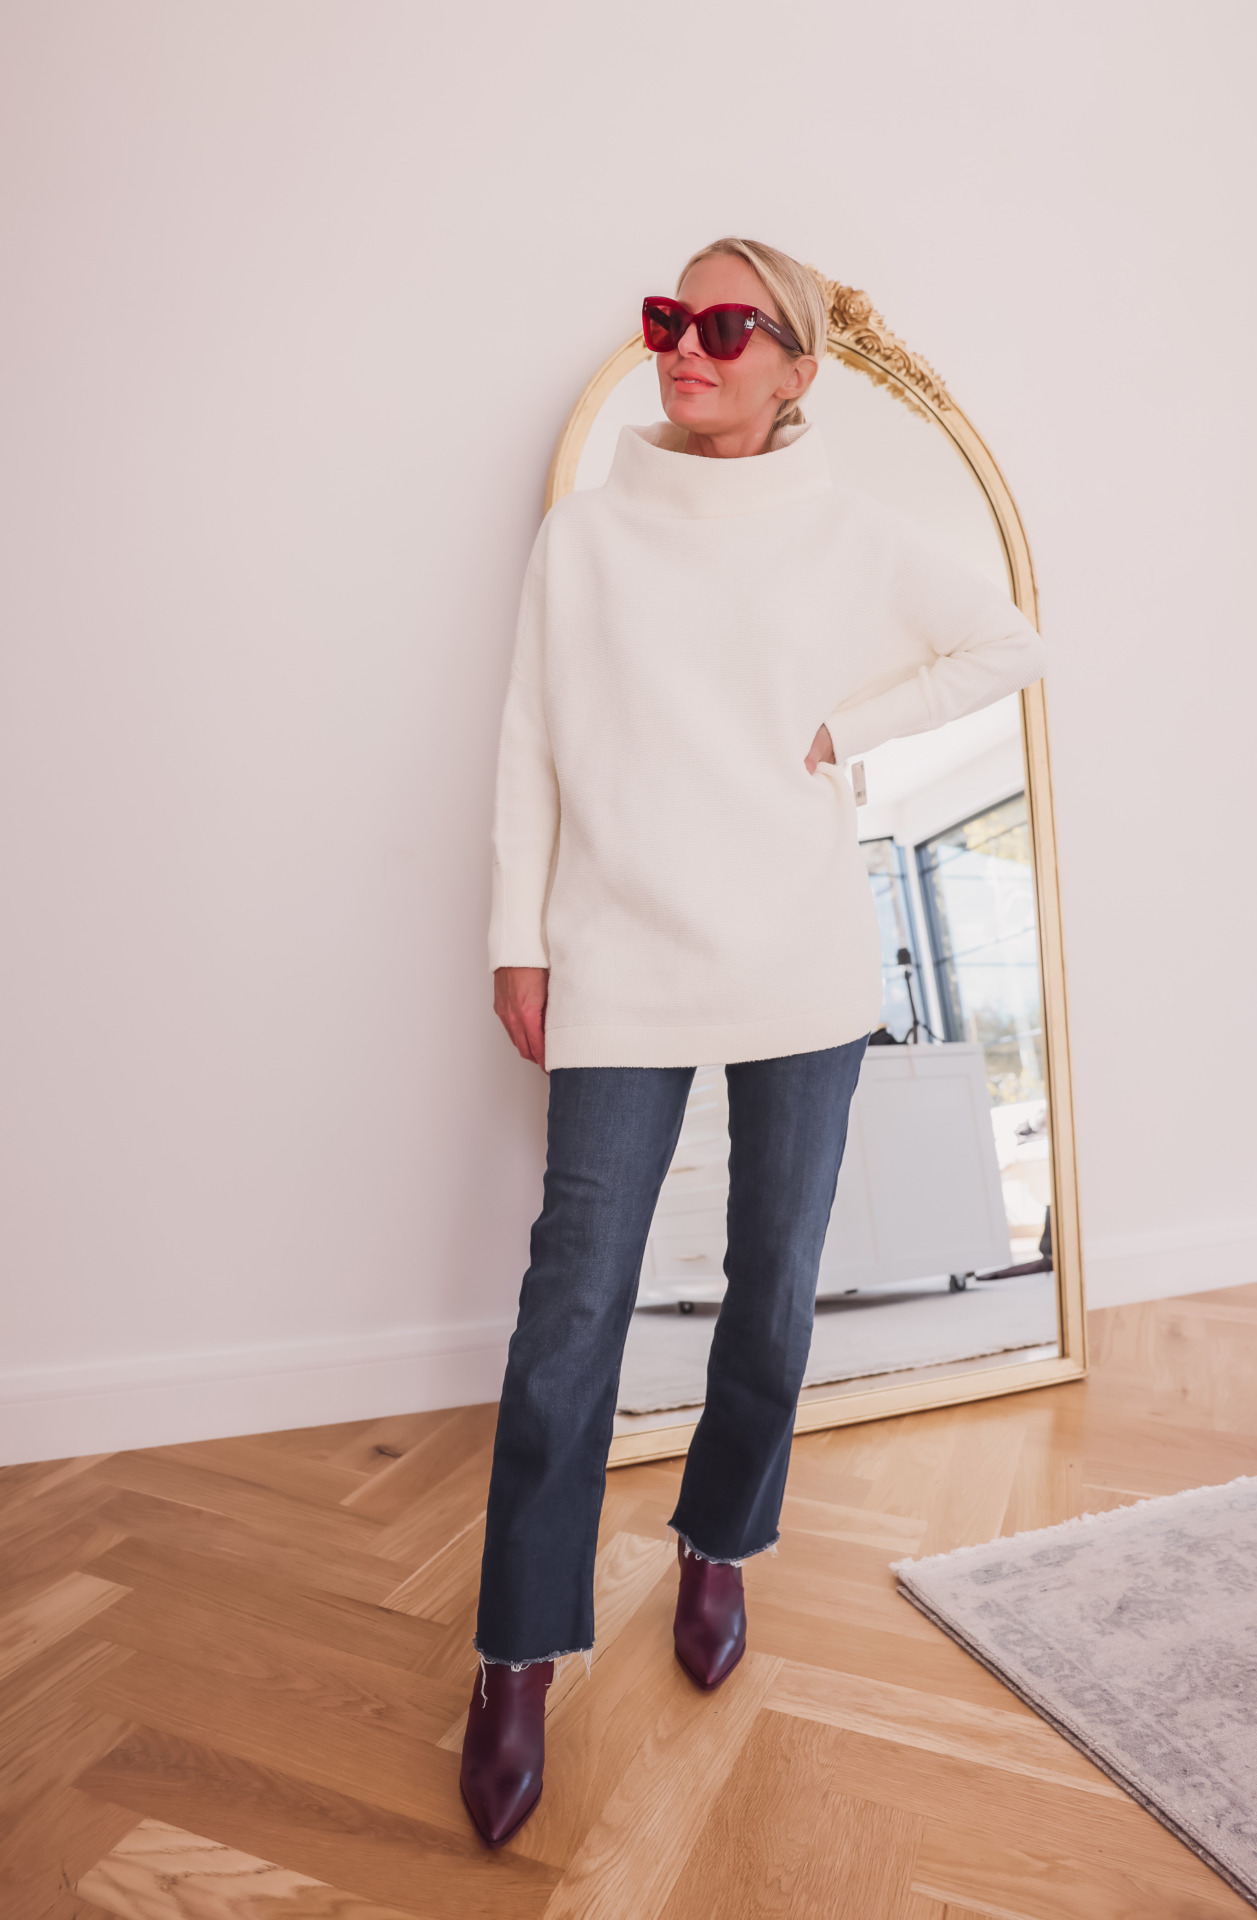 Tunic Sweater & Jeans | Classic Fall Outfits